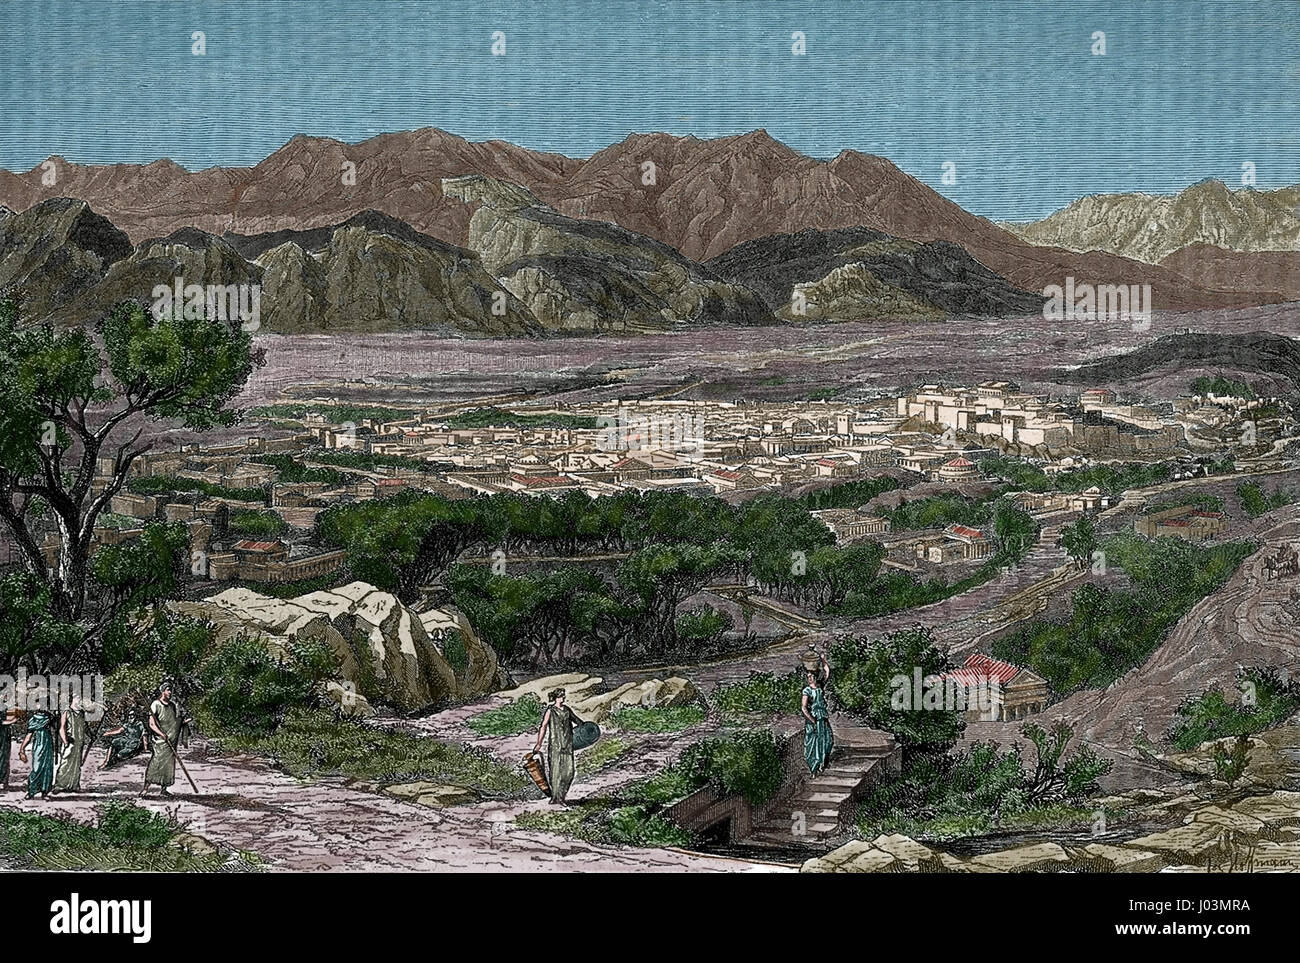 Imaginary reconstruction of ancient Spartan city-state. Engraving, 19th century. Greece nad Rome, Jakob Falke, 1879 Color. Stock Photo